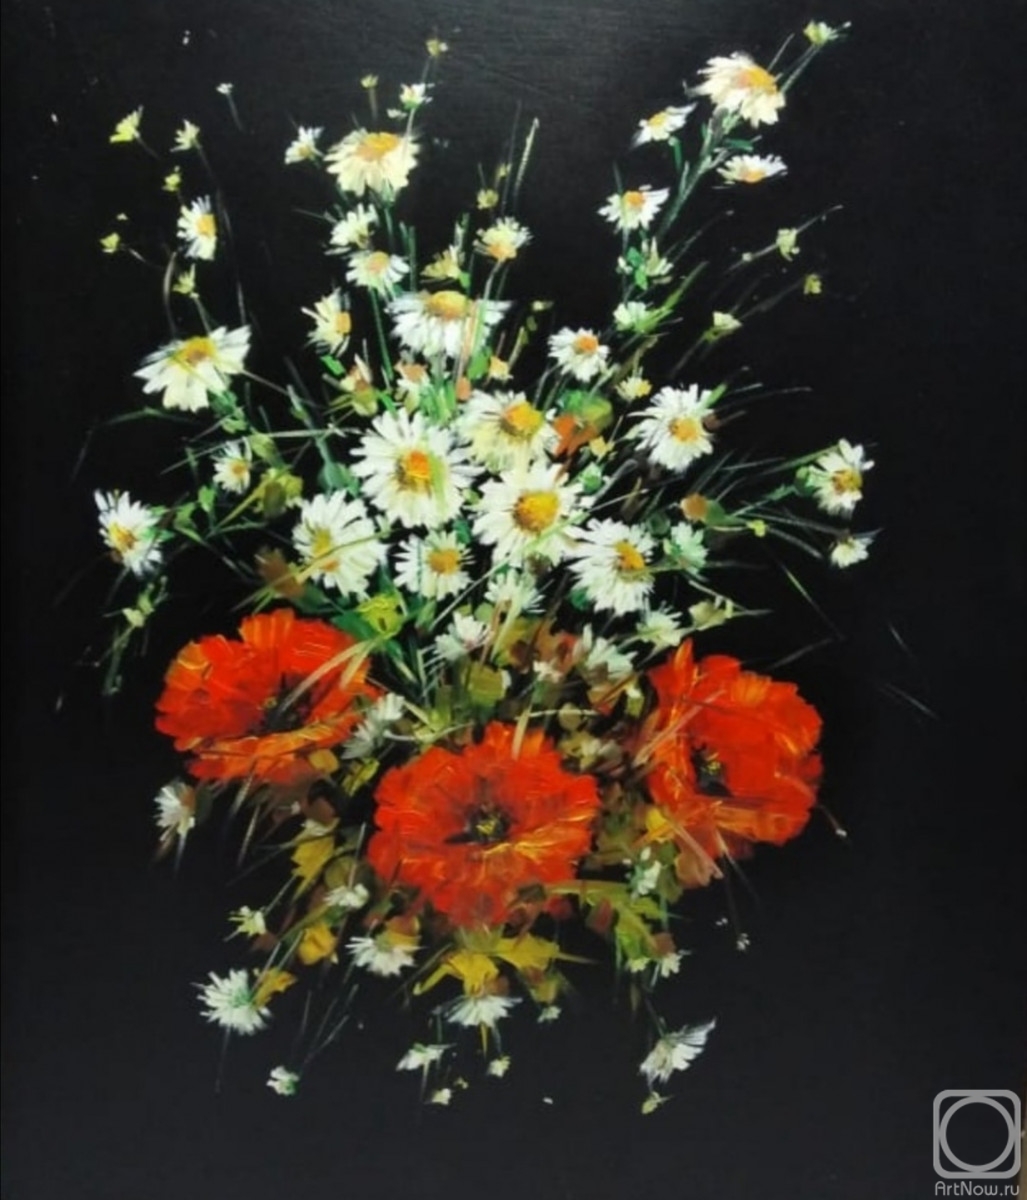 Miftahutdinov Nail. Bouquet of poppies and daisies on a black background